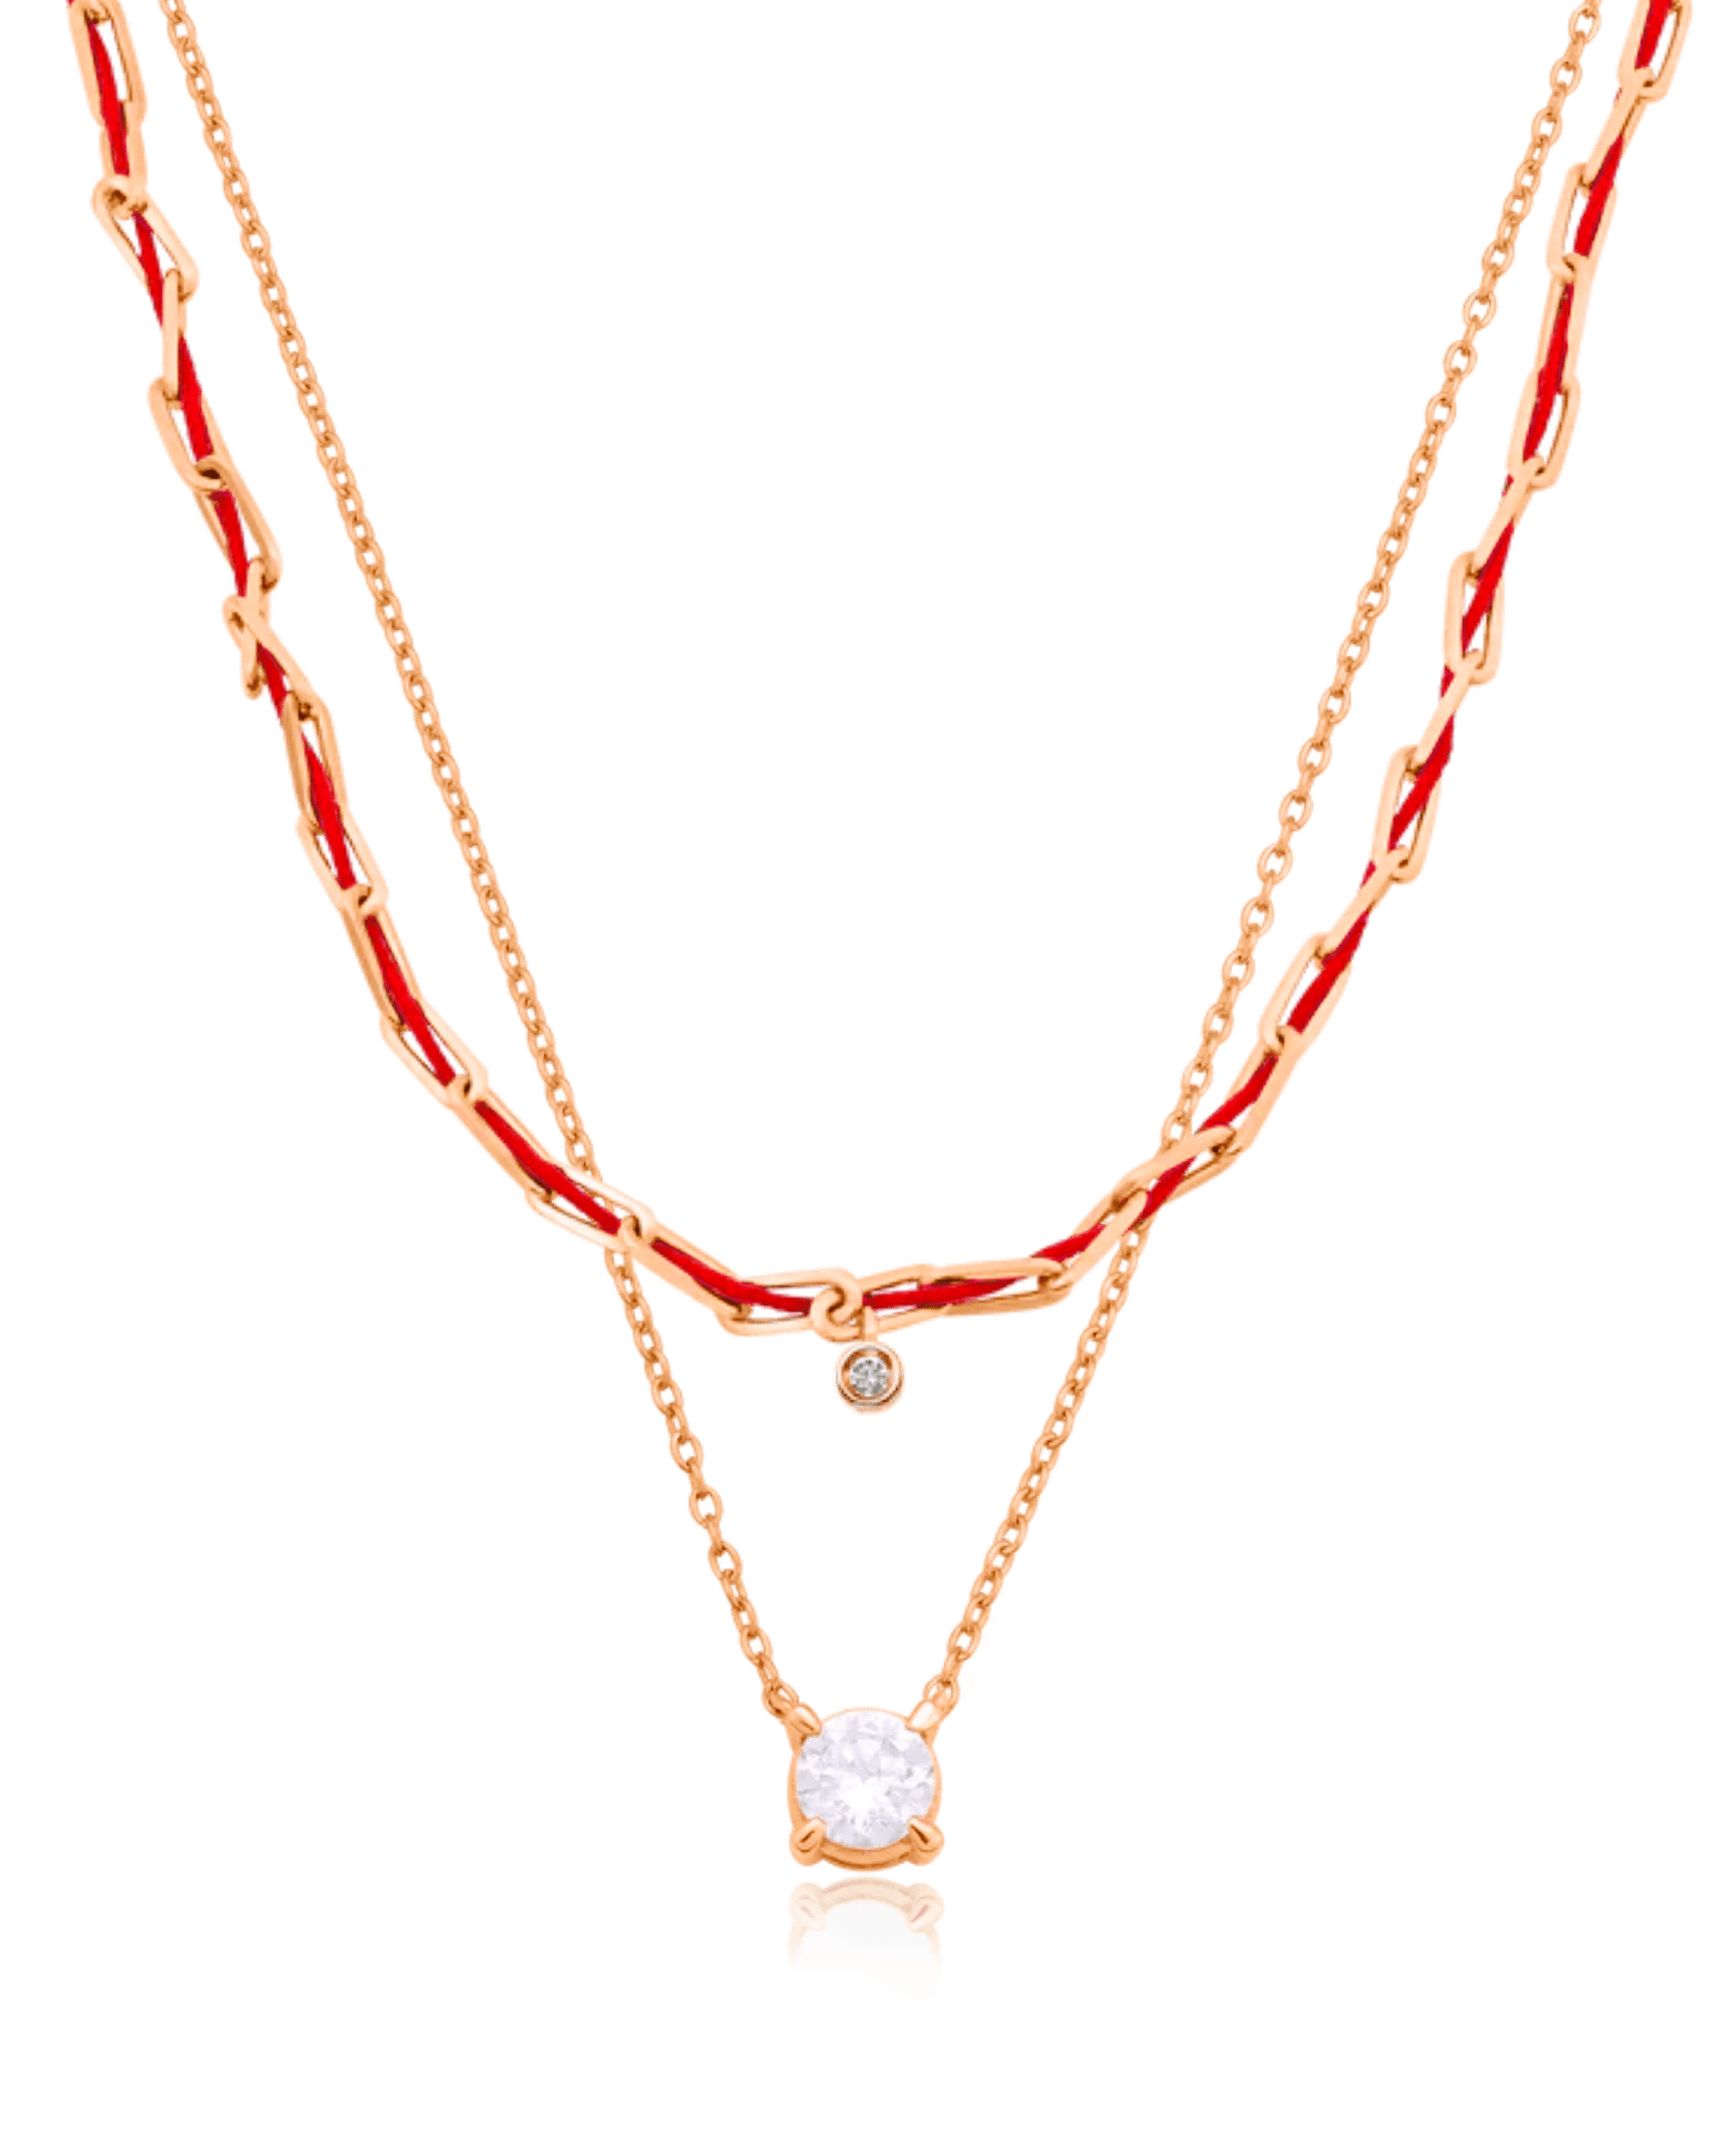 Set of Twine Diamond & Round Solitaire Diamond Necklaces - 925 Sterling Silver Necklaces magal-dev 